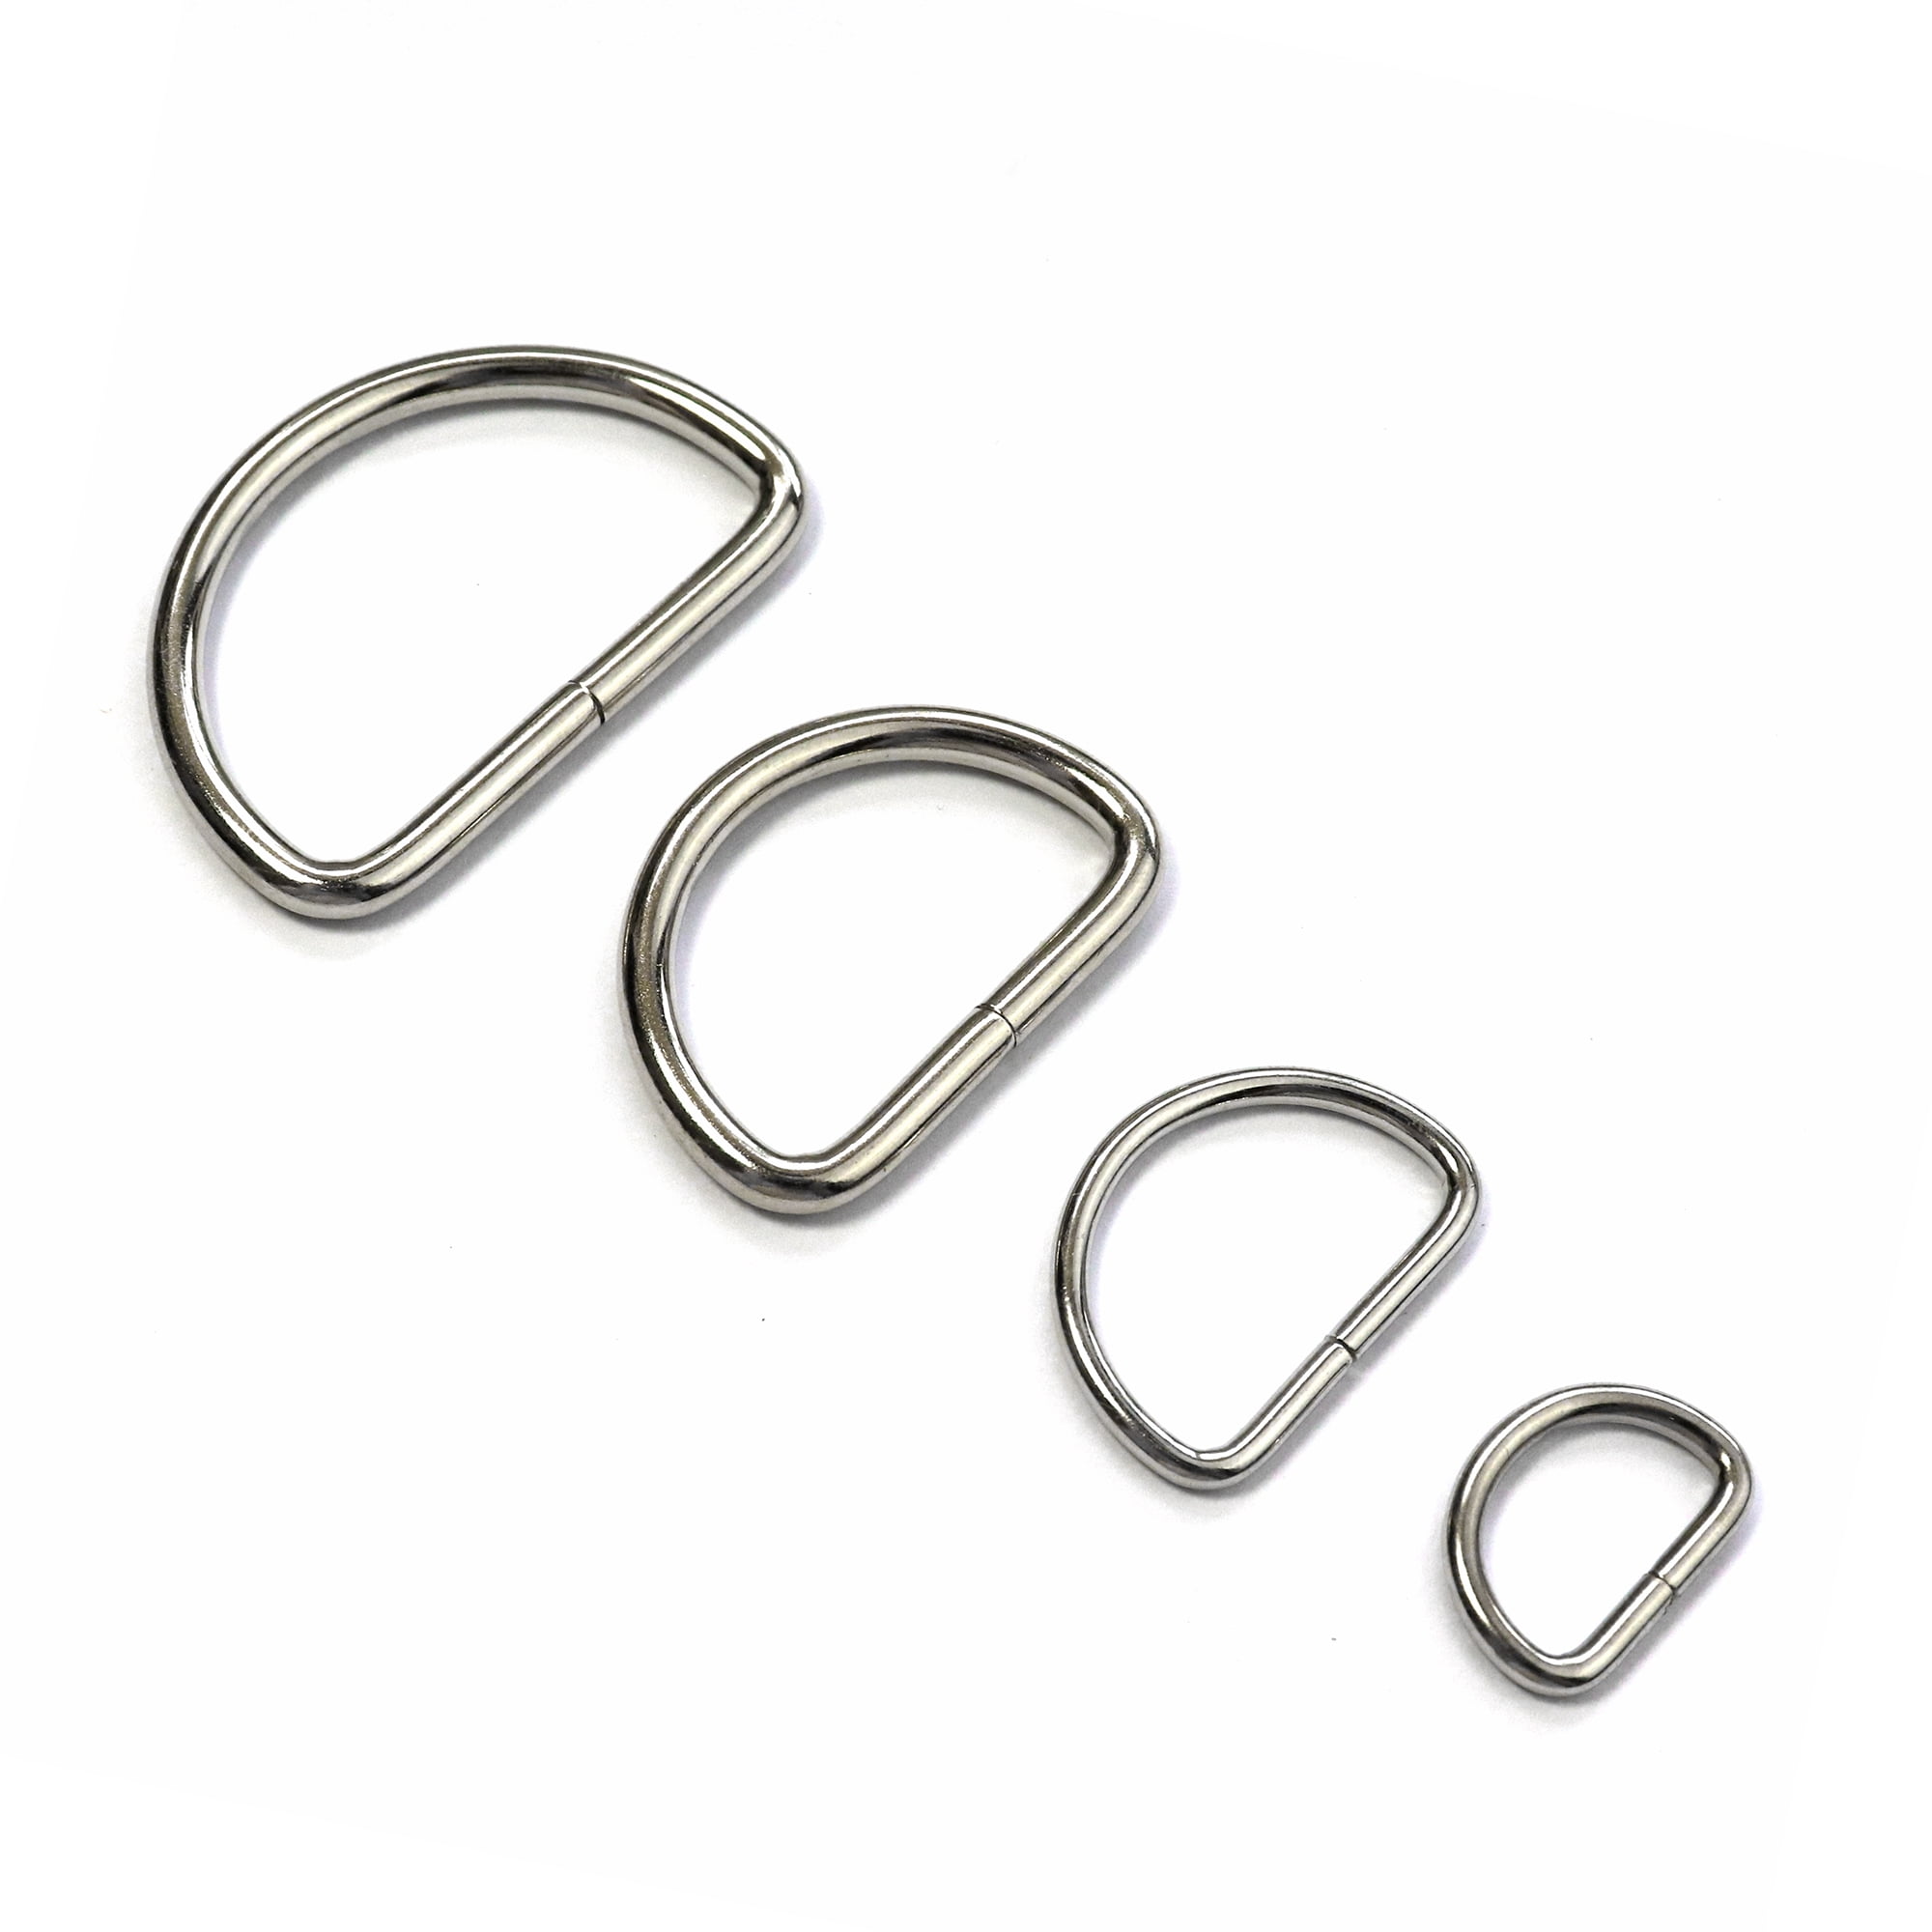 Metal D Ring Non Welded D-Rings Electroplated Black 1 Inch (100 Pack) 